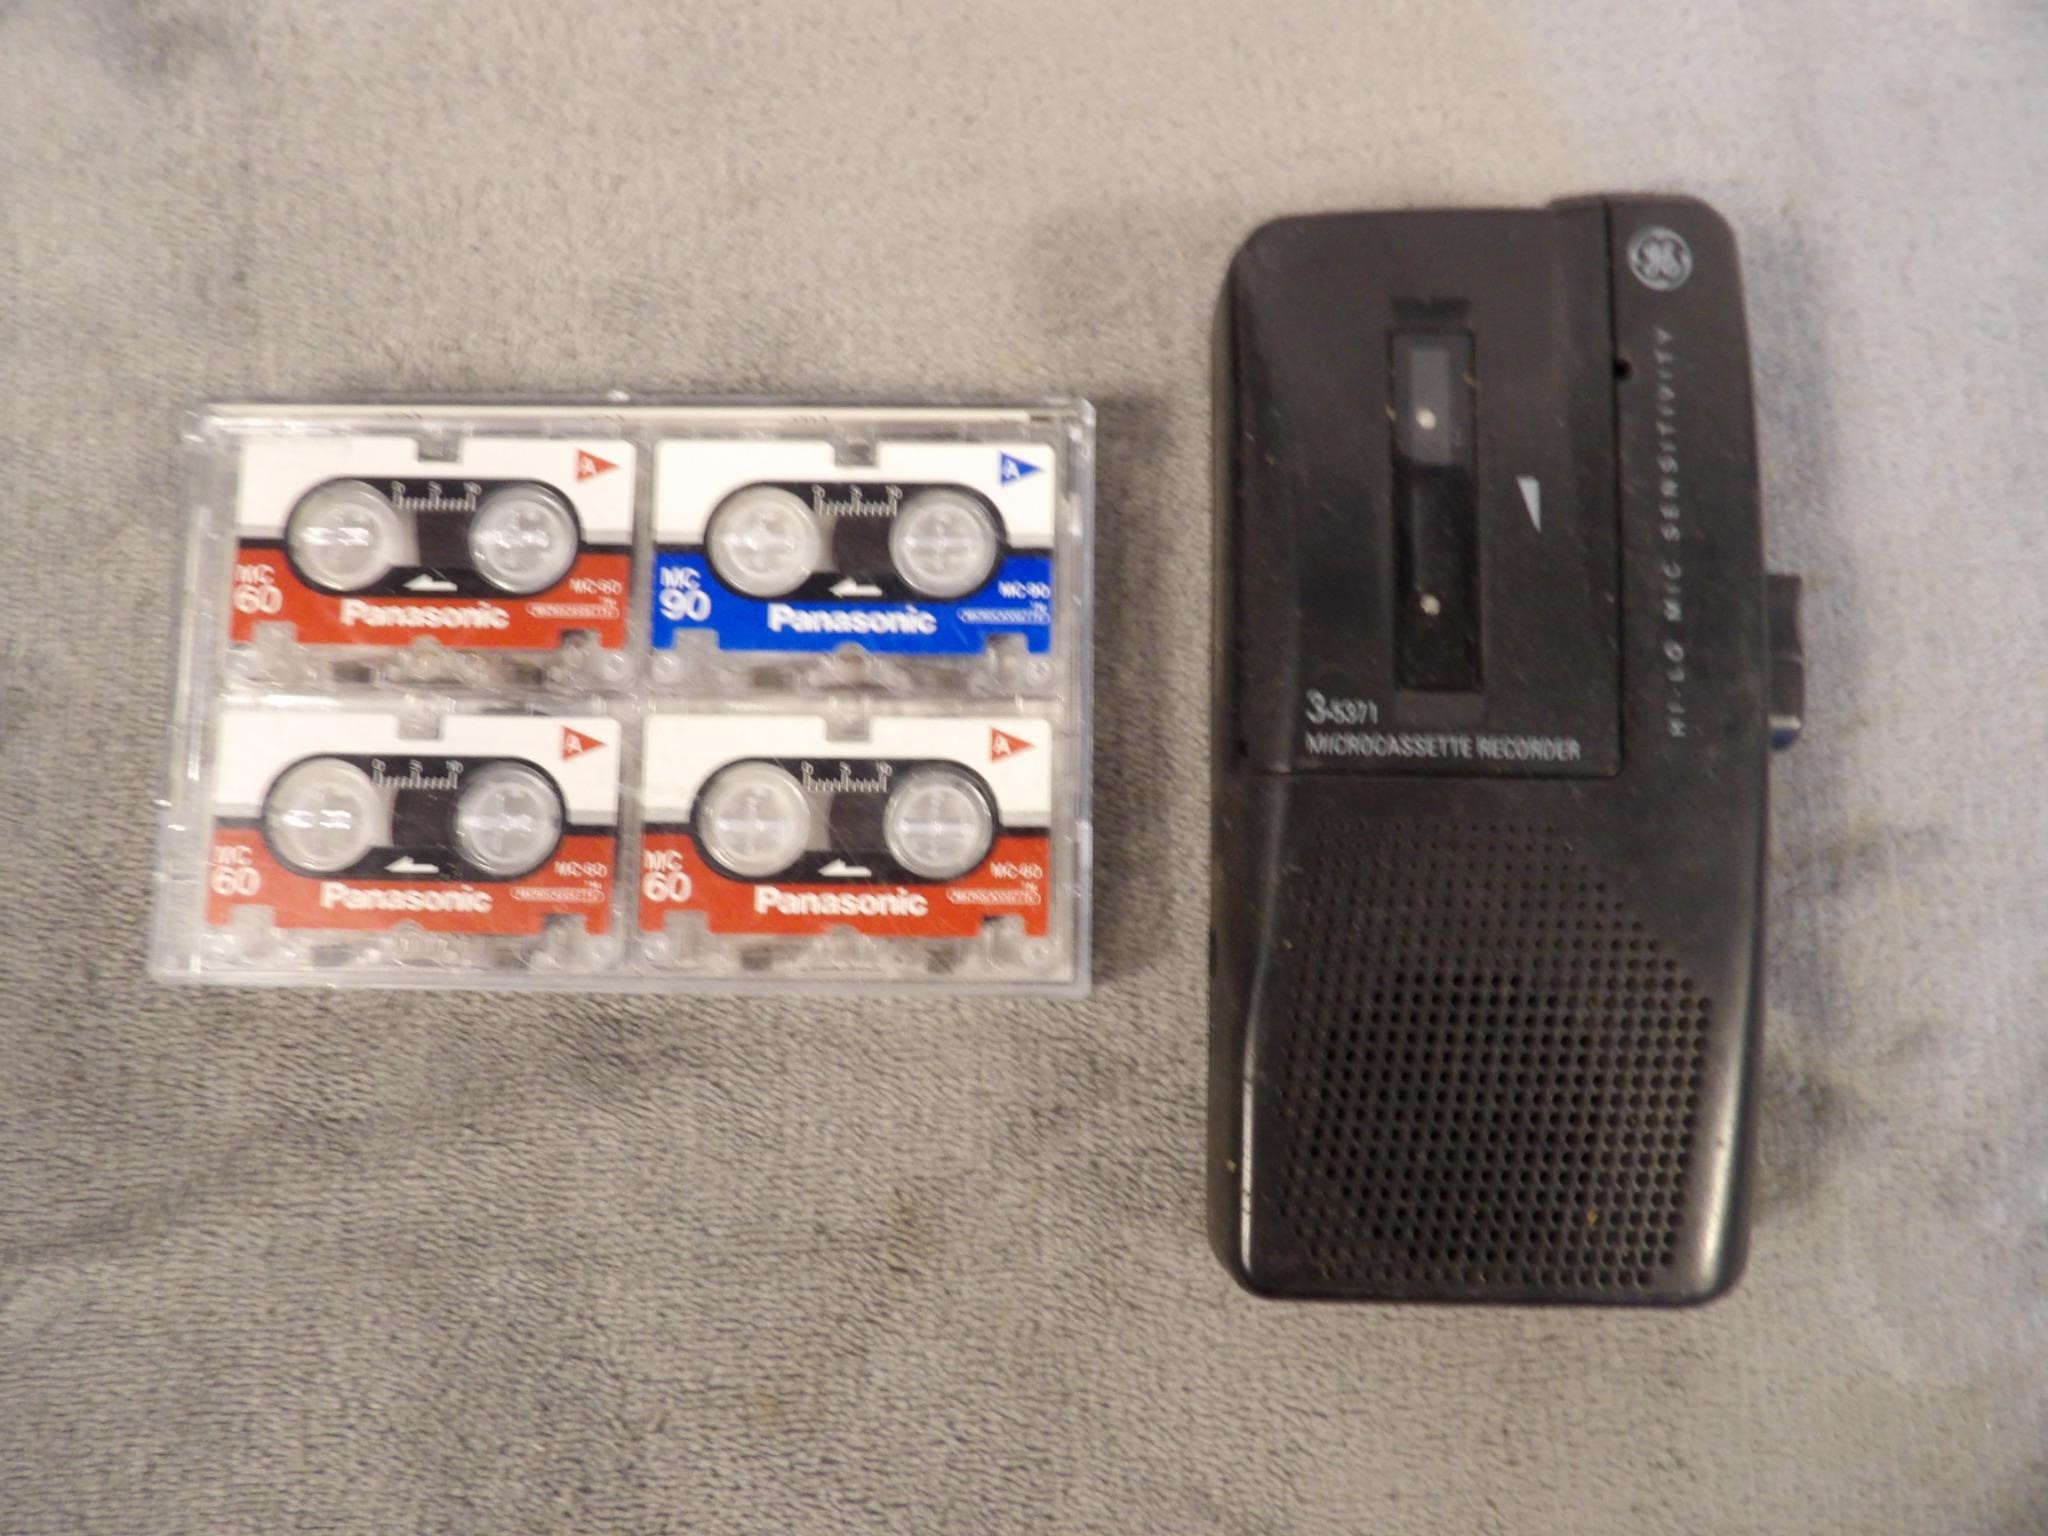 GE Microcassette Recorder w/ Panasonic tapes